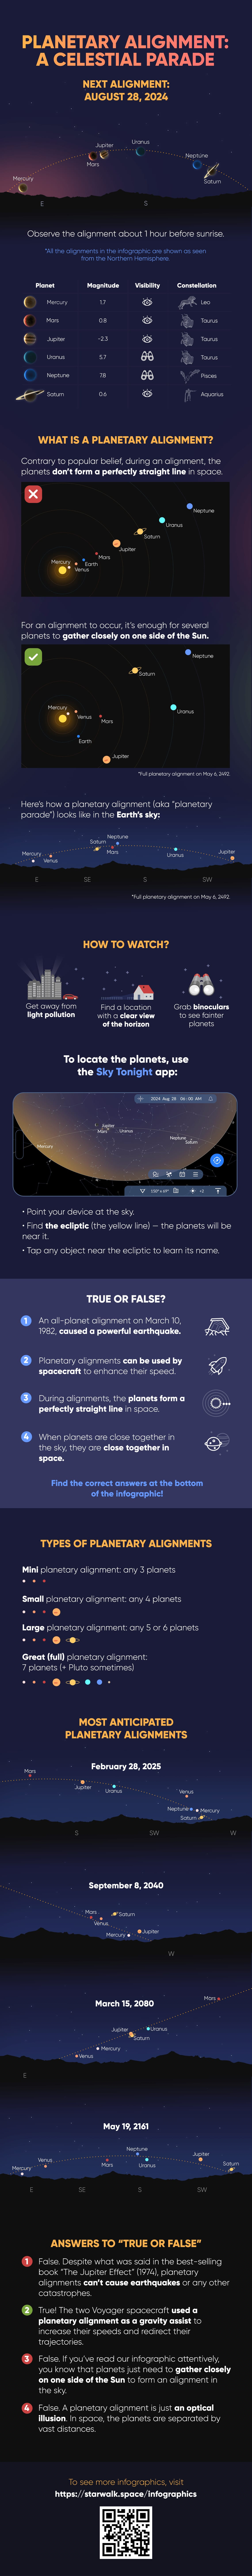 Planetary Alignment Infographic, August 20